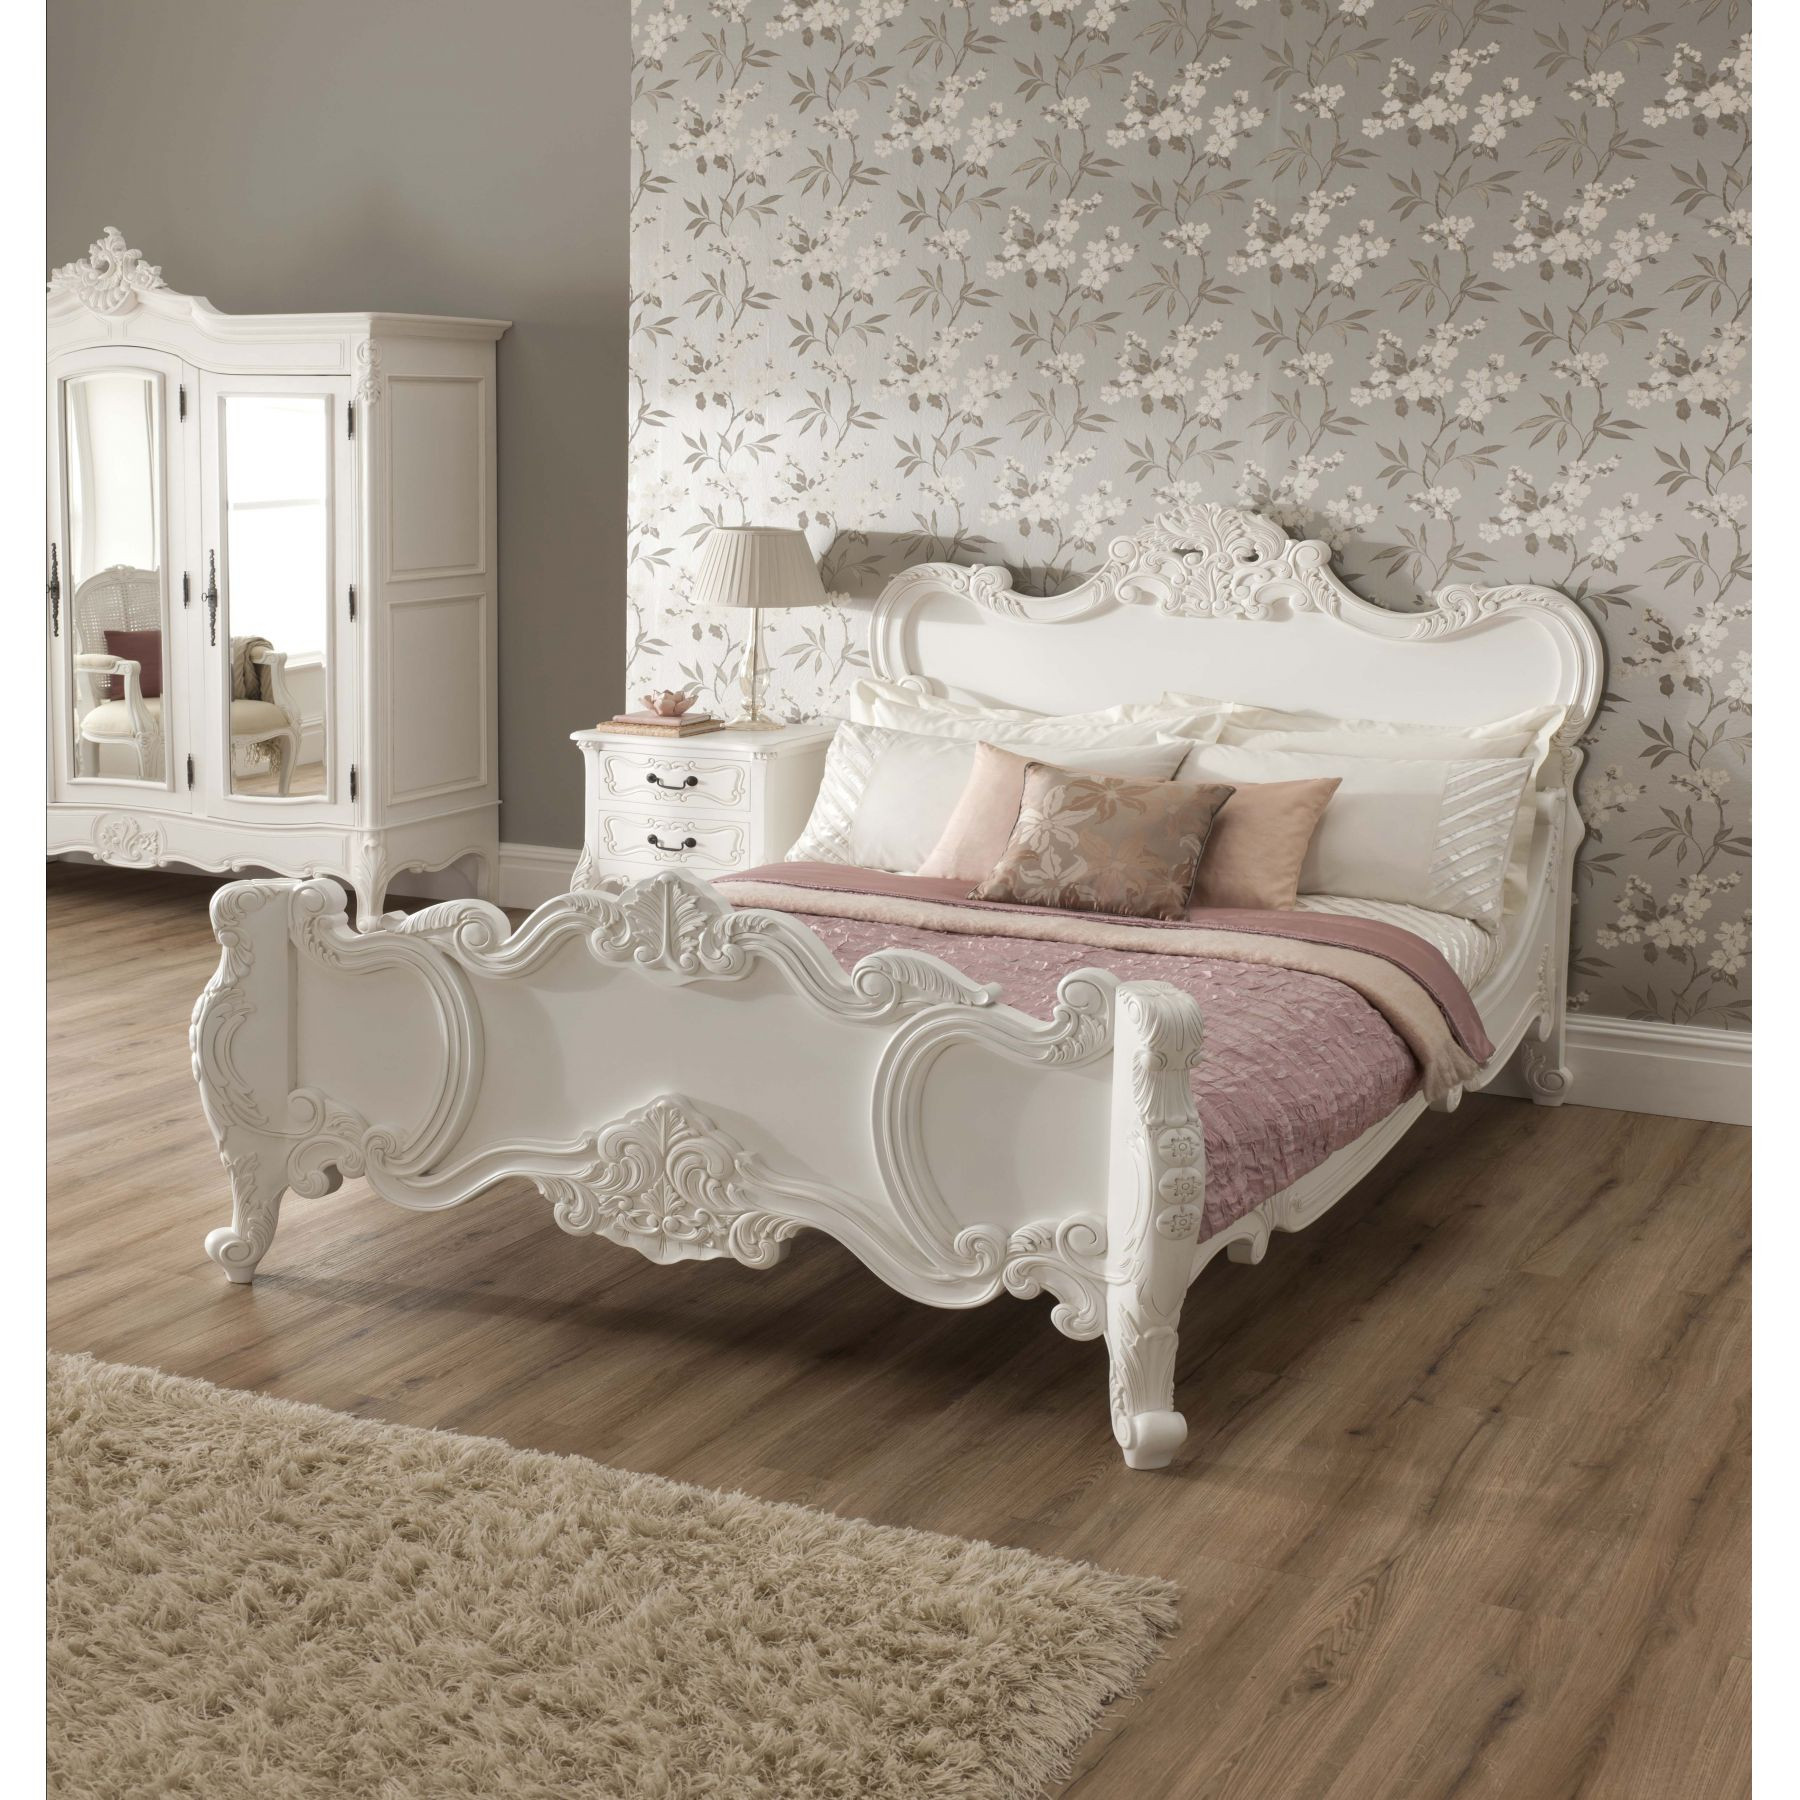 White Shabby Chic Bedroom
 Vintage Your Room with 9 Shabby Chic Bedroom Furniture